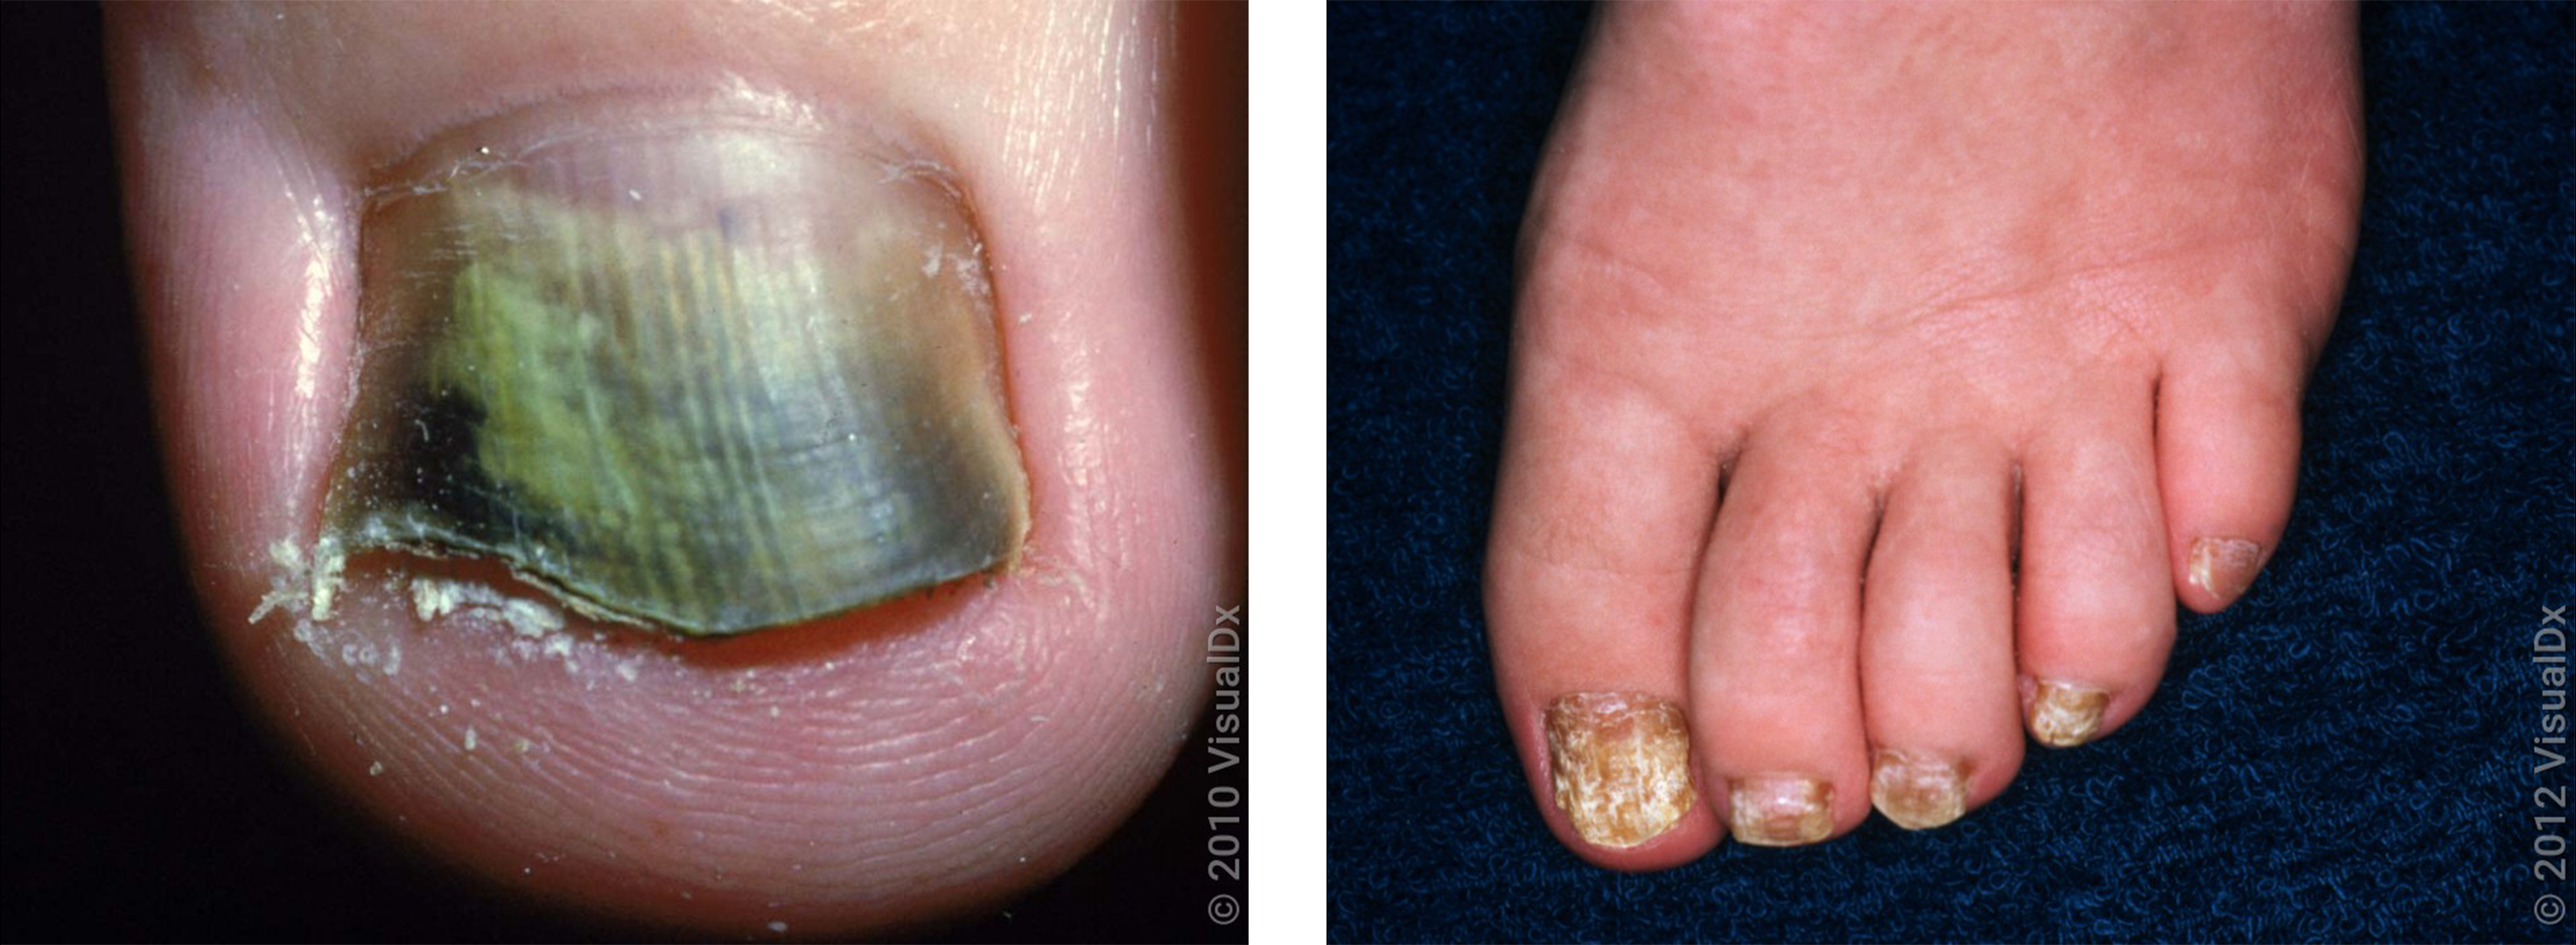 Why do Toenails Smell So Bad & How to Get Rid of Smelly Toenails?